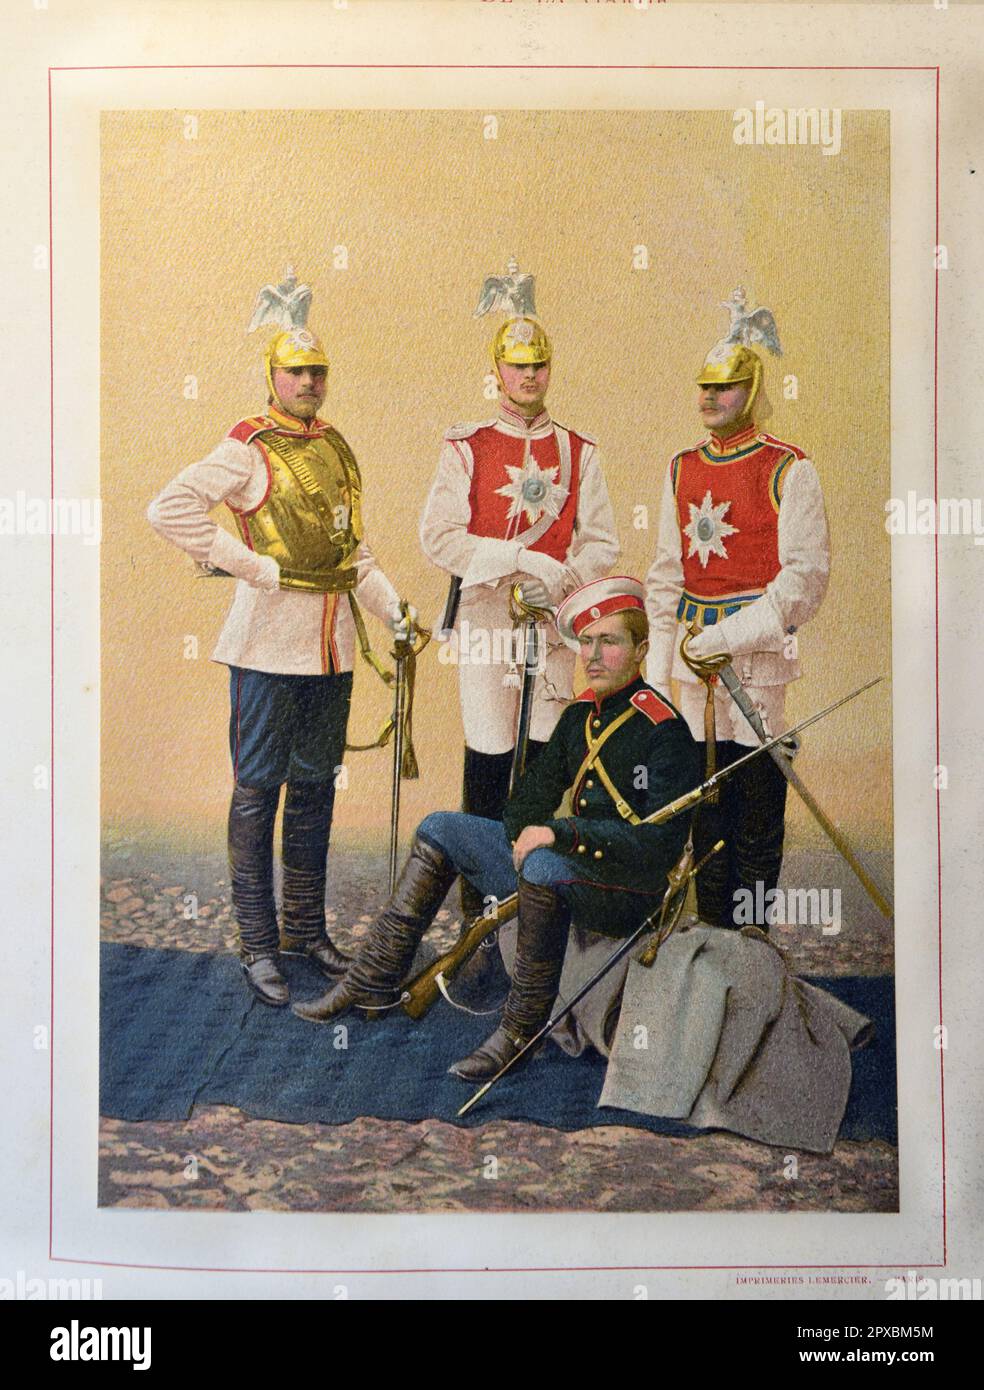 Imperial Russian Army. Chevalier Guard Regiment. Chevalier Guard Regiment of HM The Empress Maria Fedorovna. Officer and soldiers in various outfits. Stock Photo